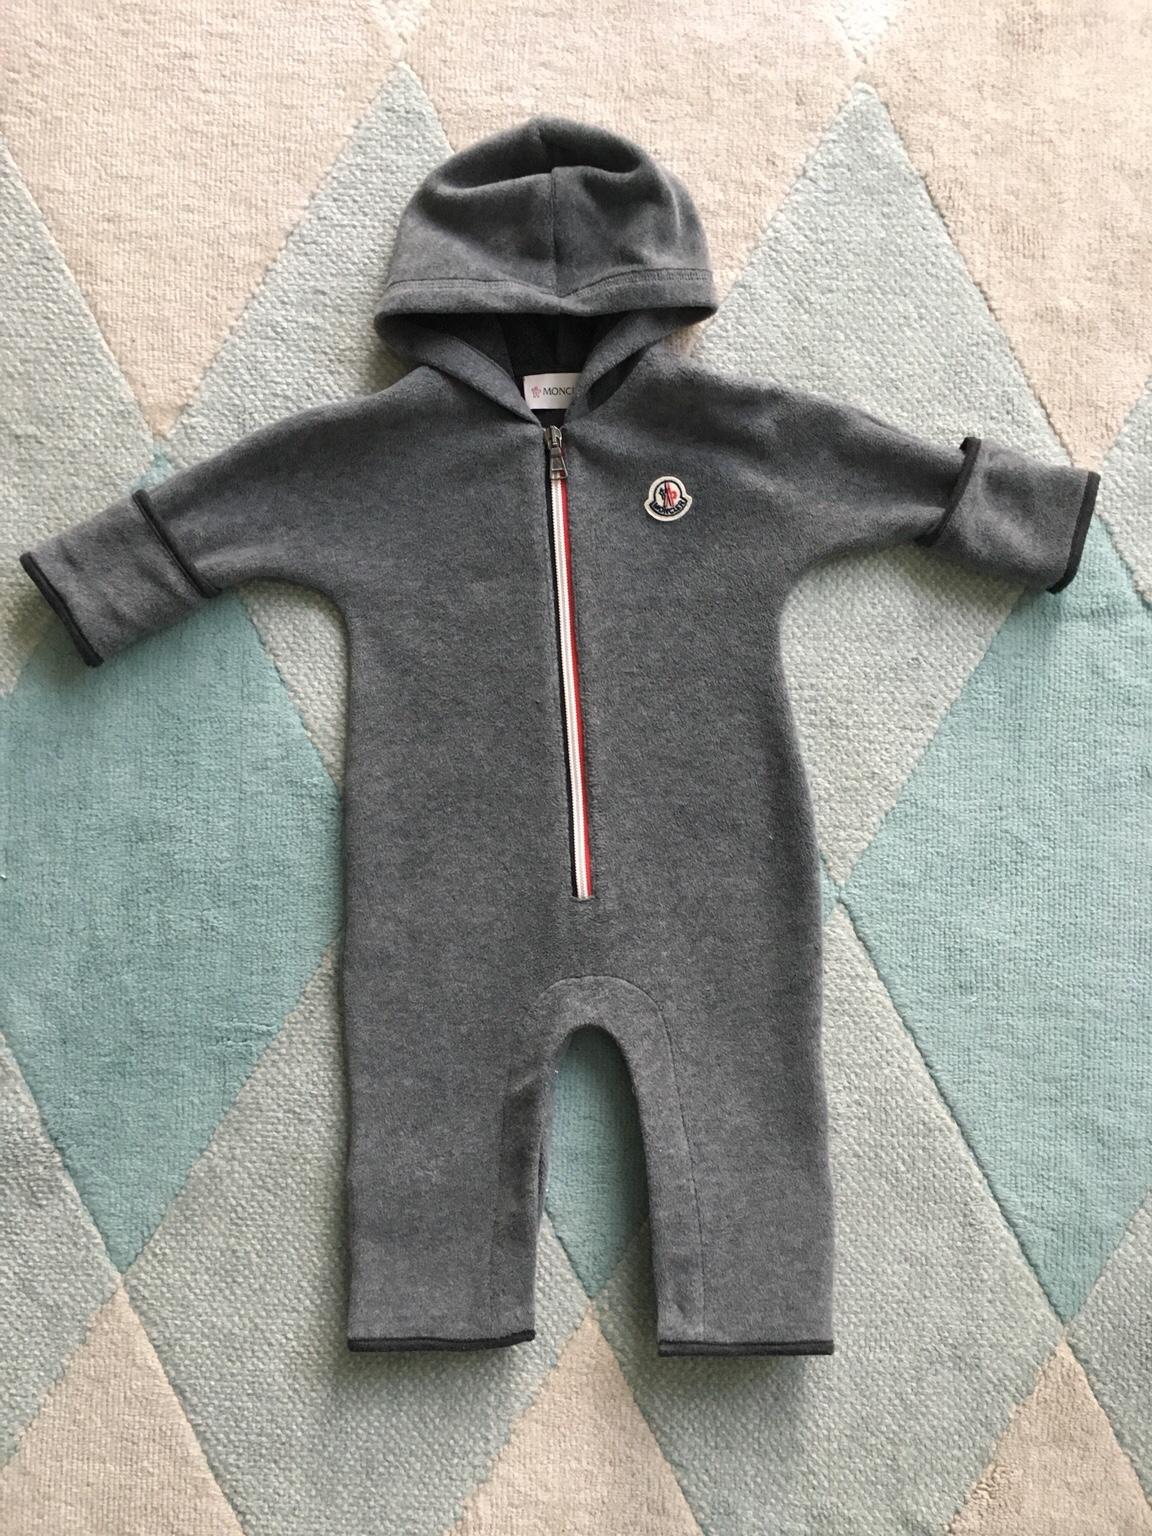 moncler overall baby